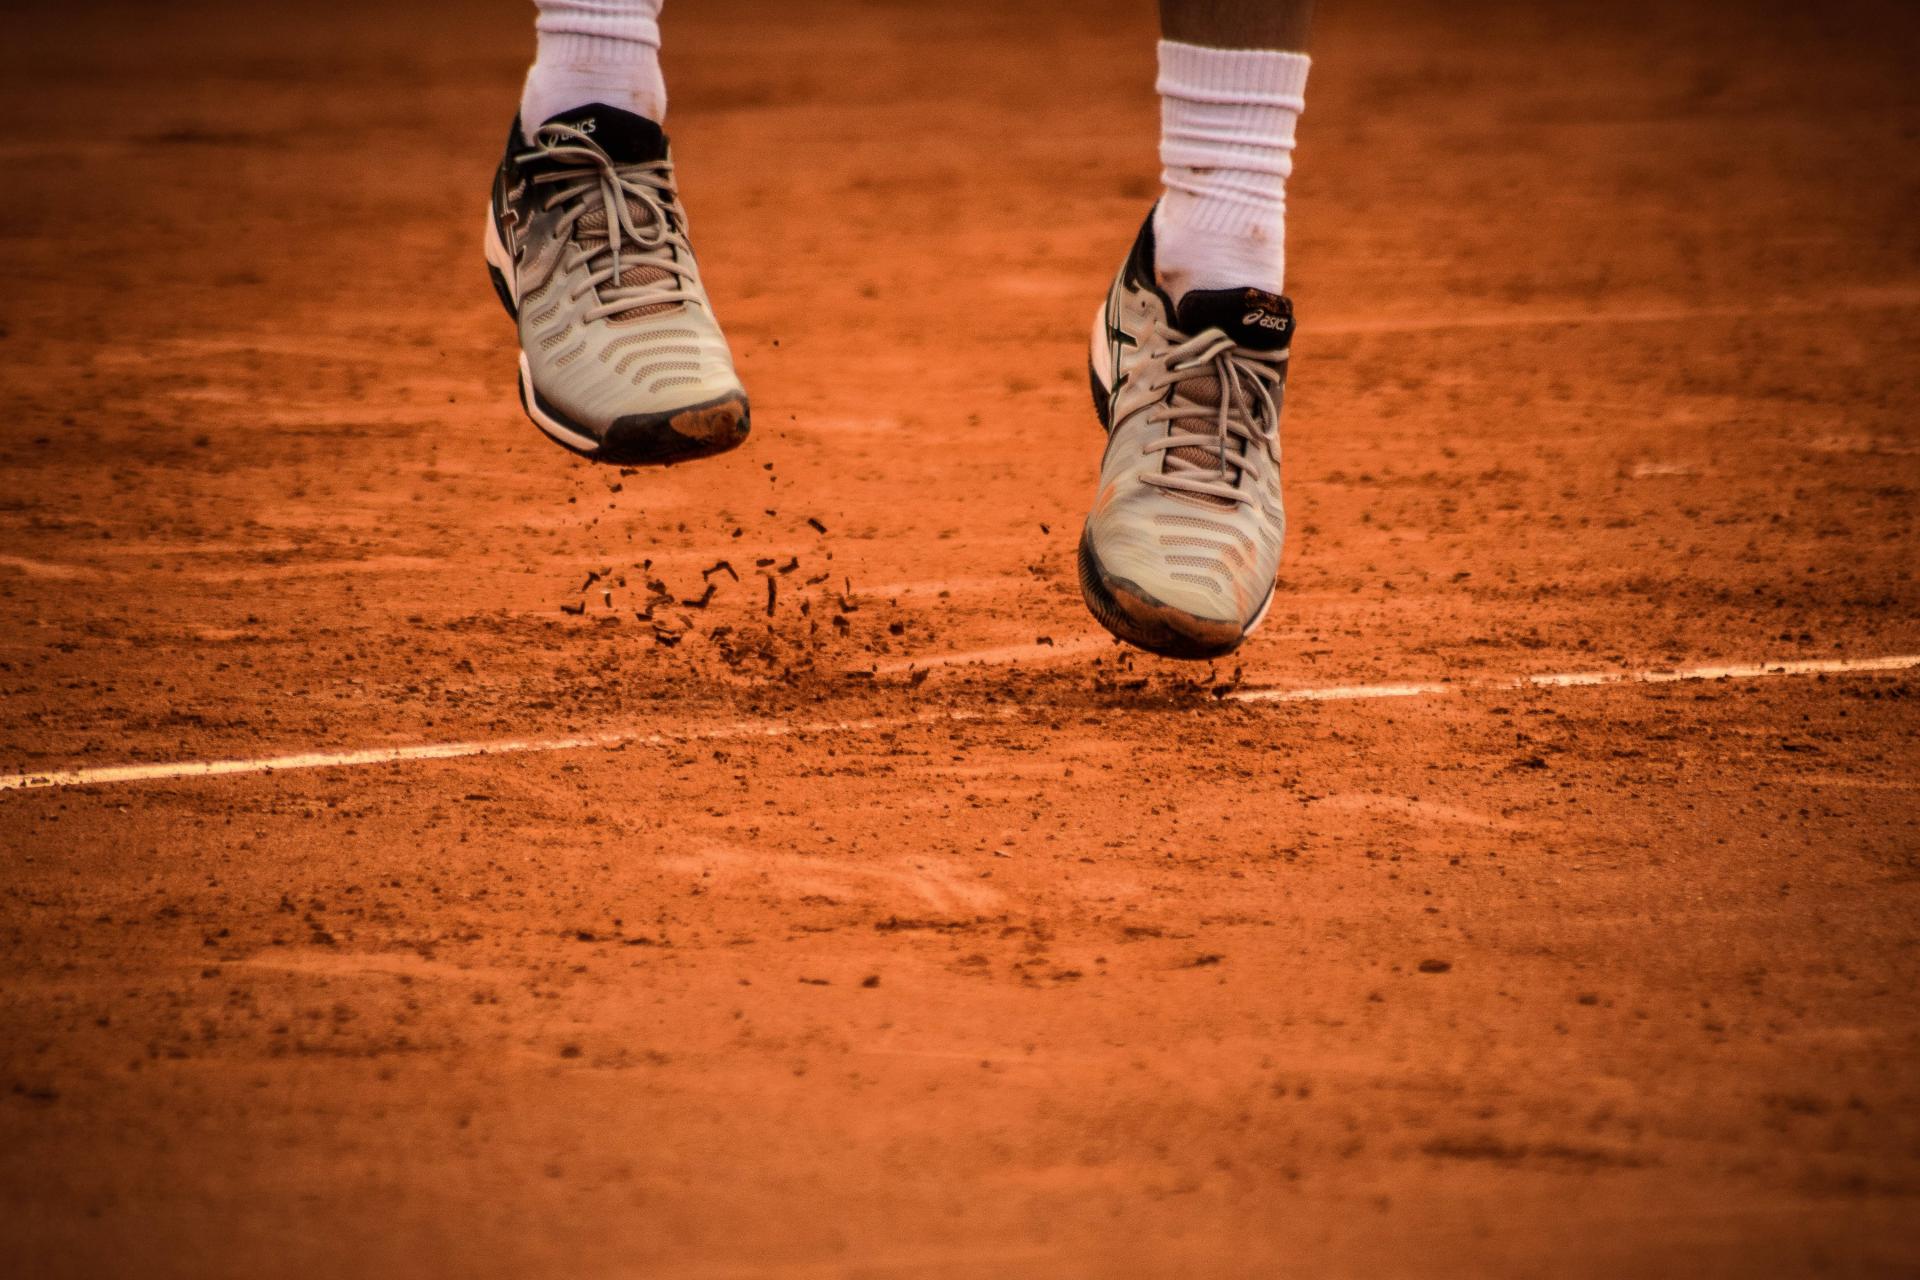 The Roland Garros is back for its 2022 edition!